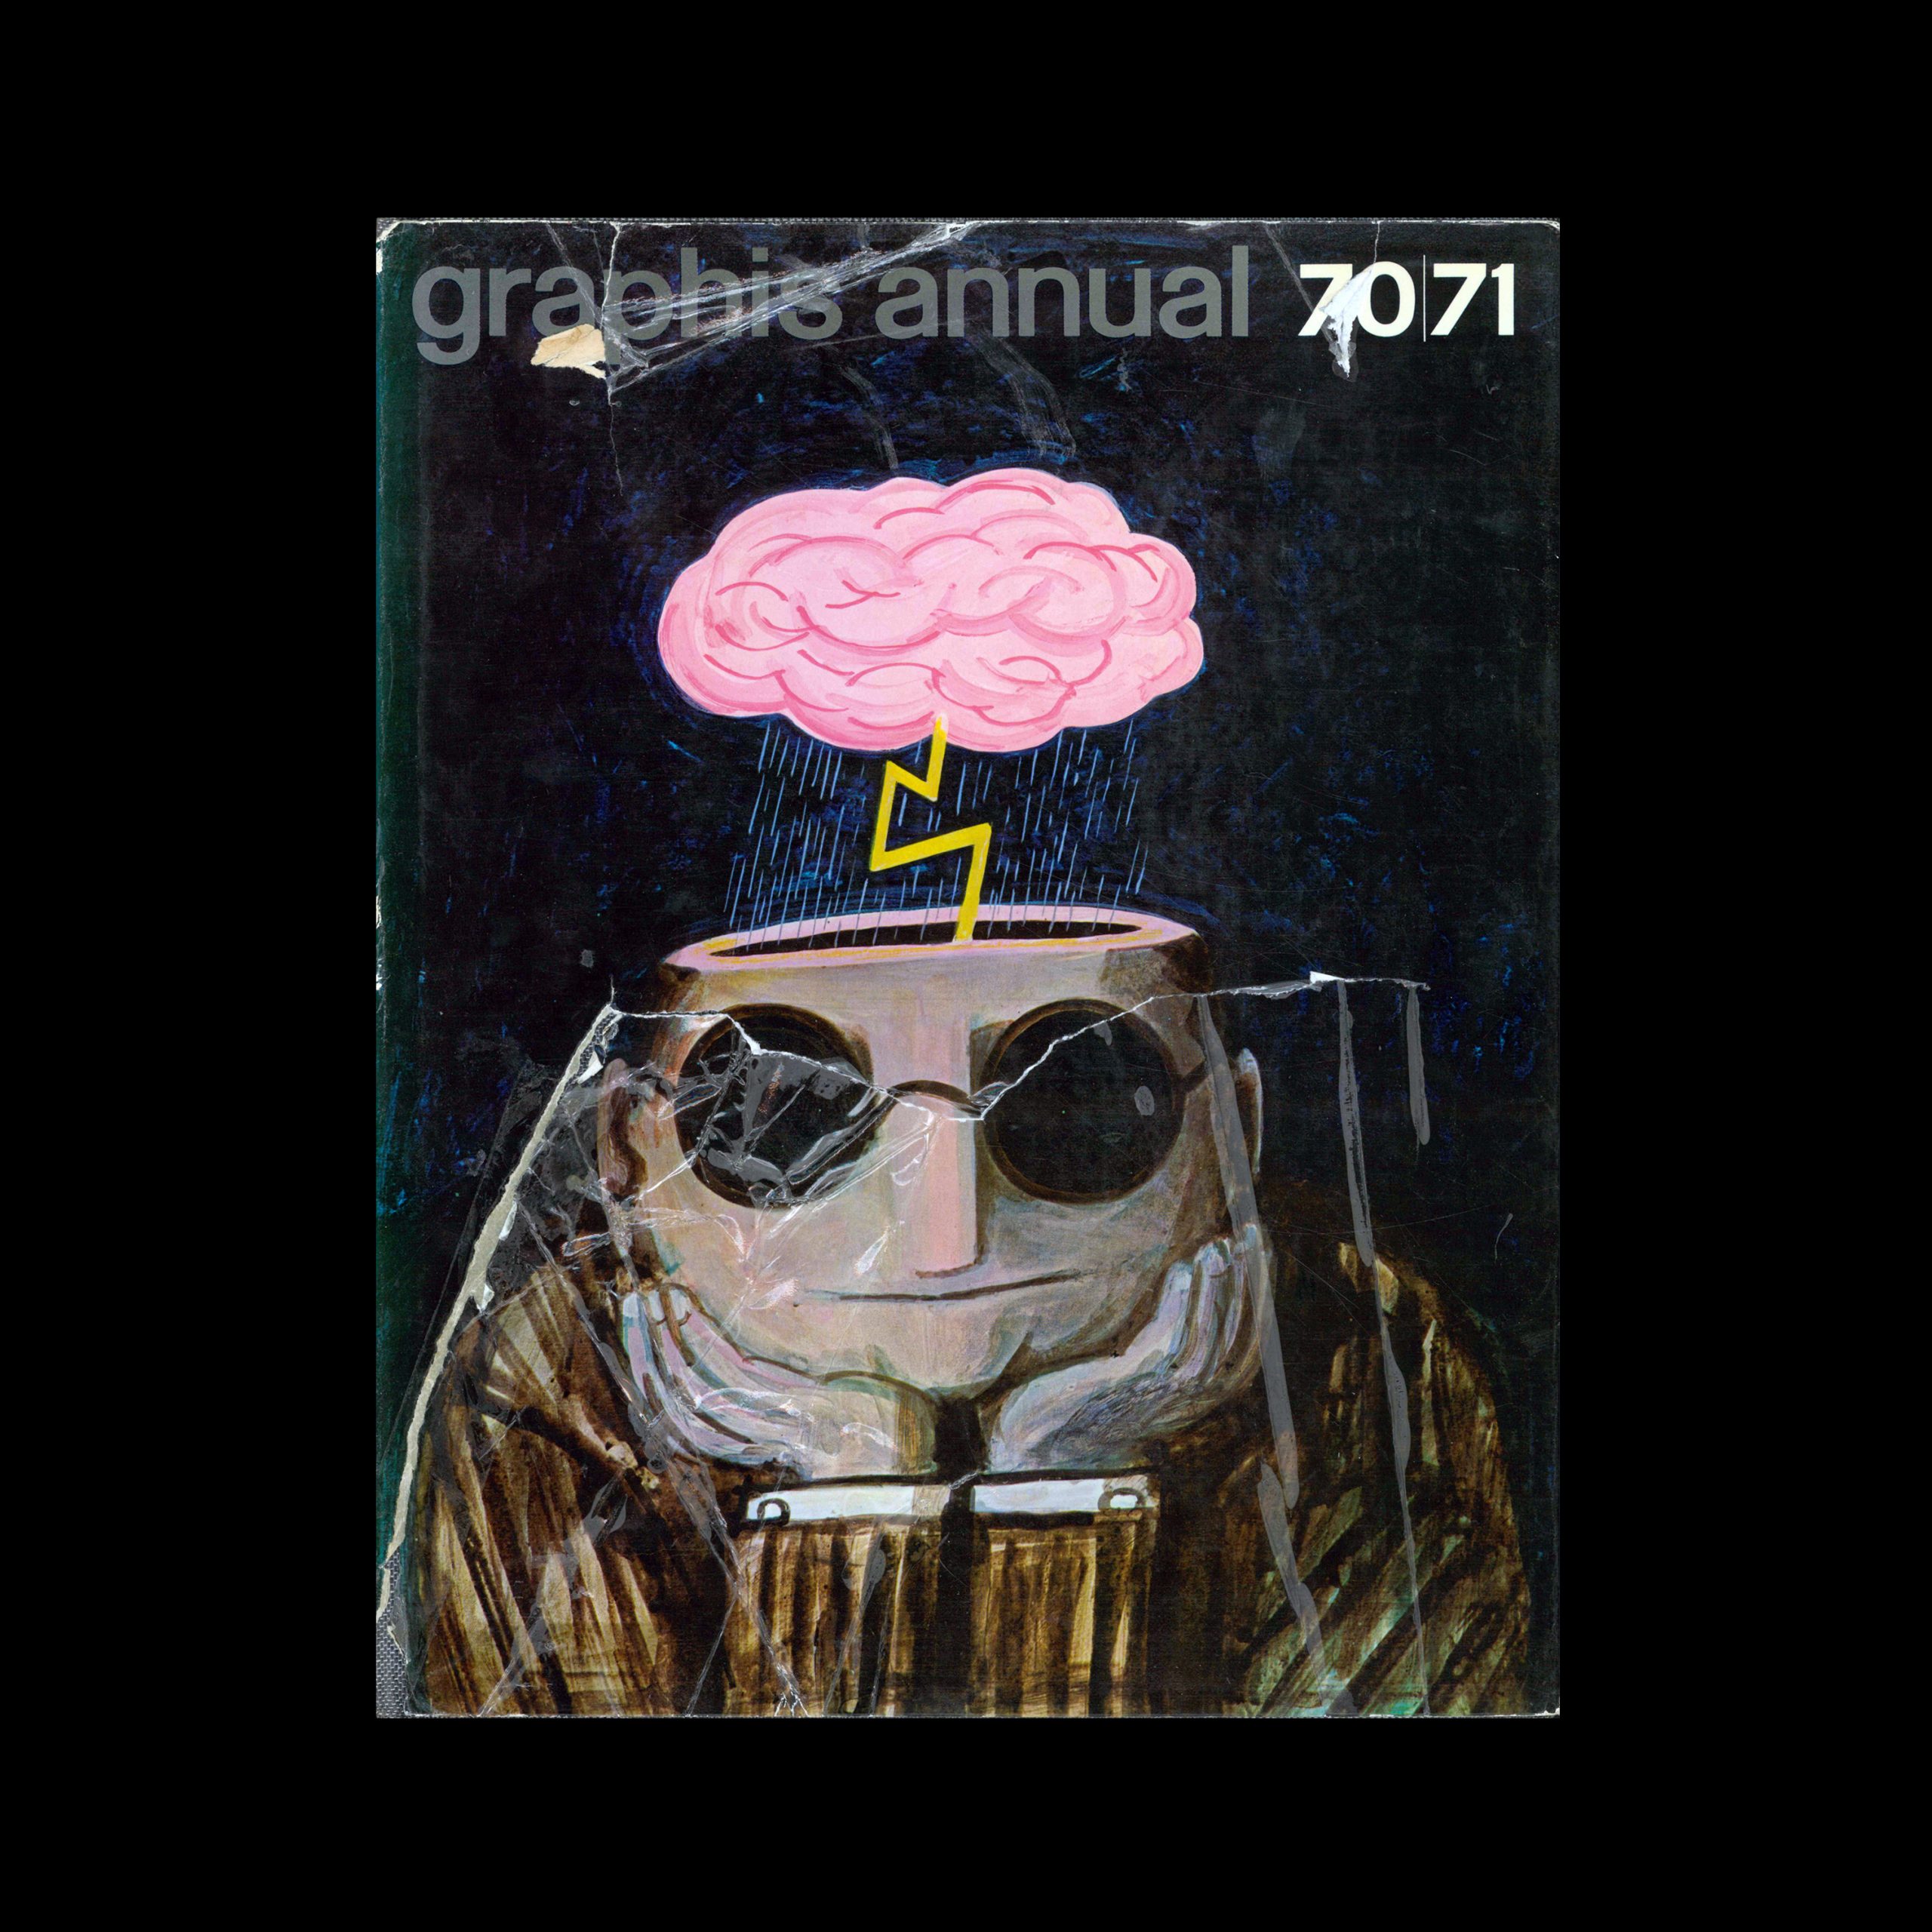 Graphis Annual 1970|71. Cover design by Tomi Ungerer